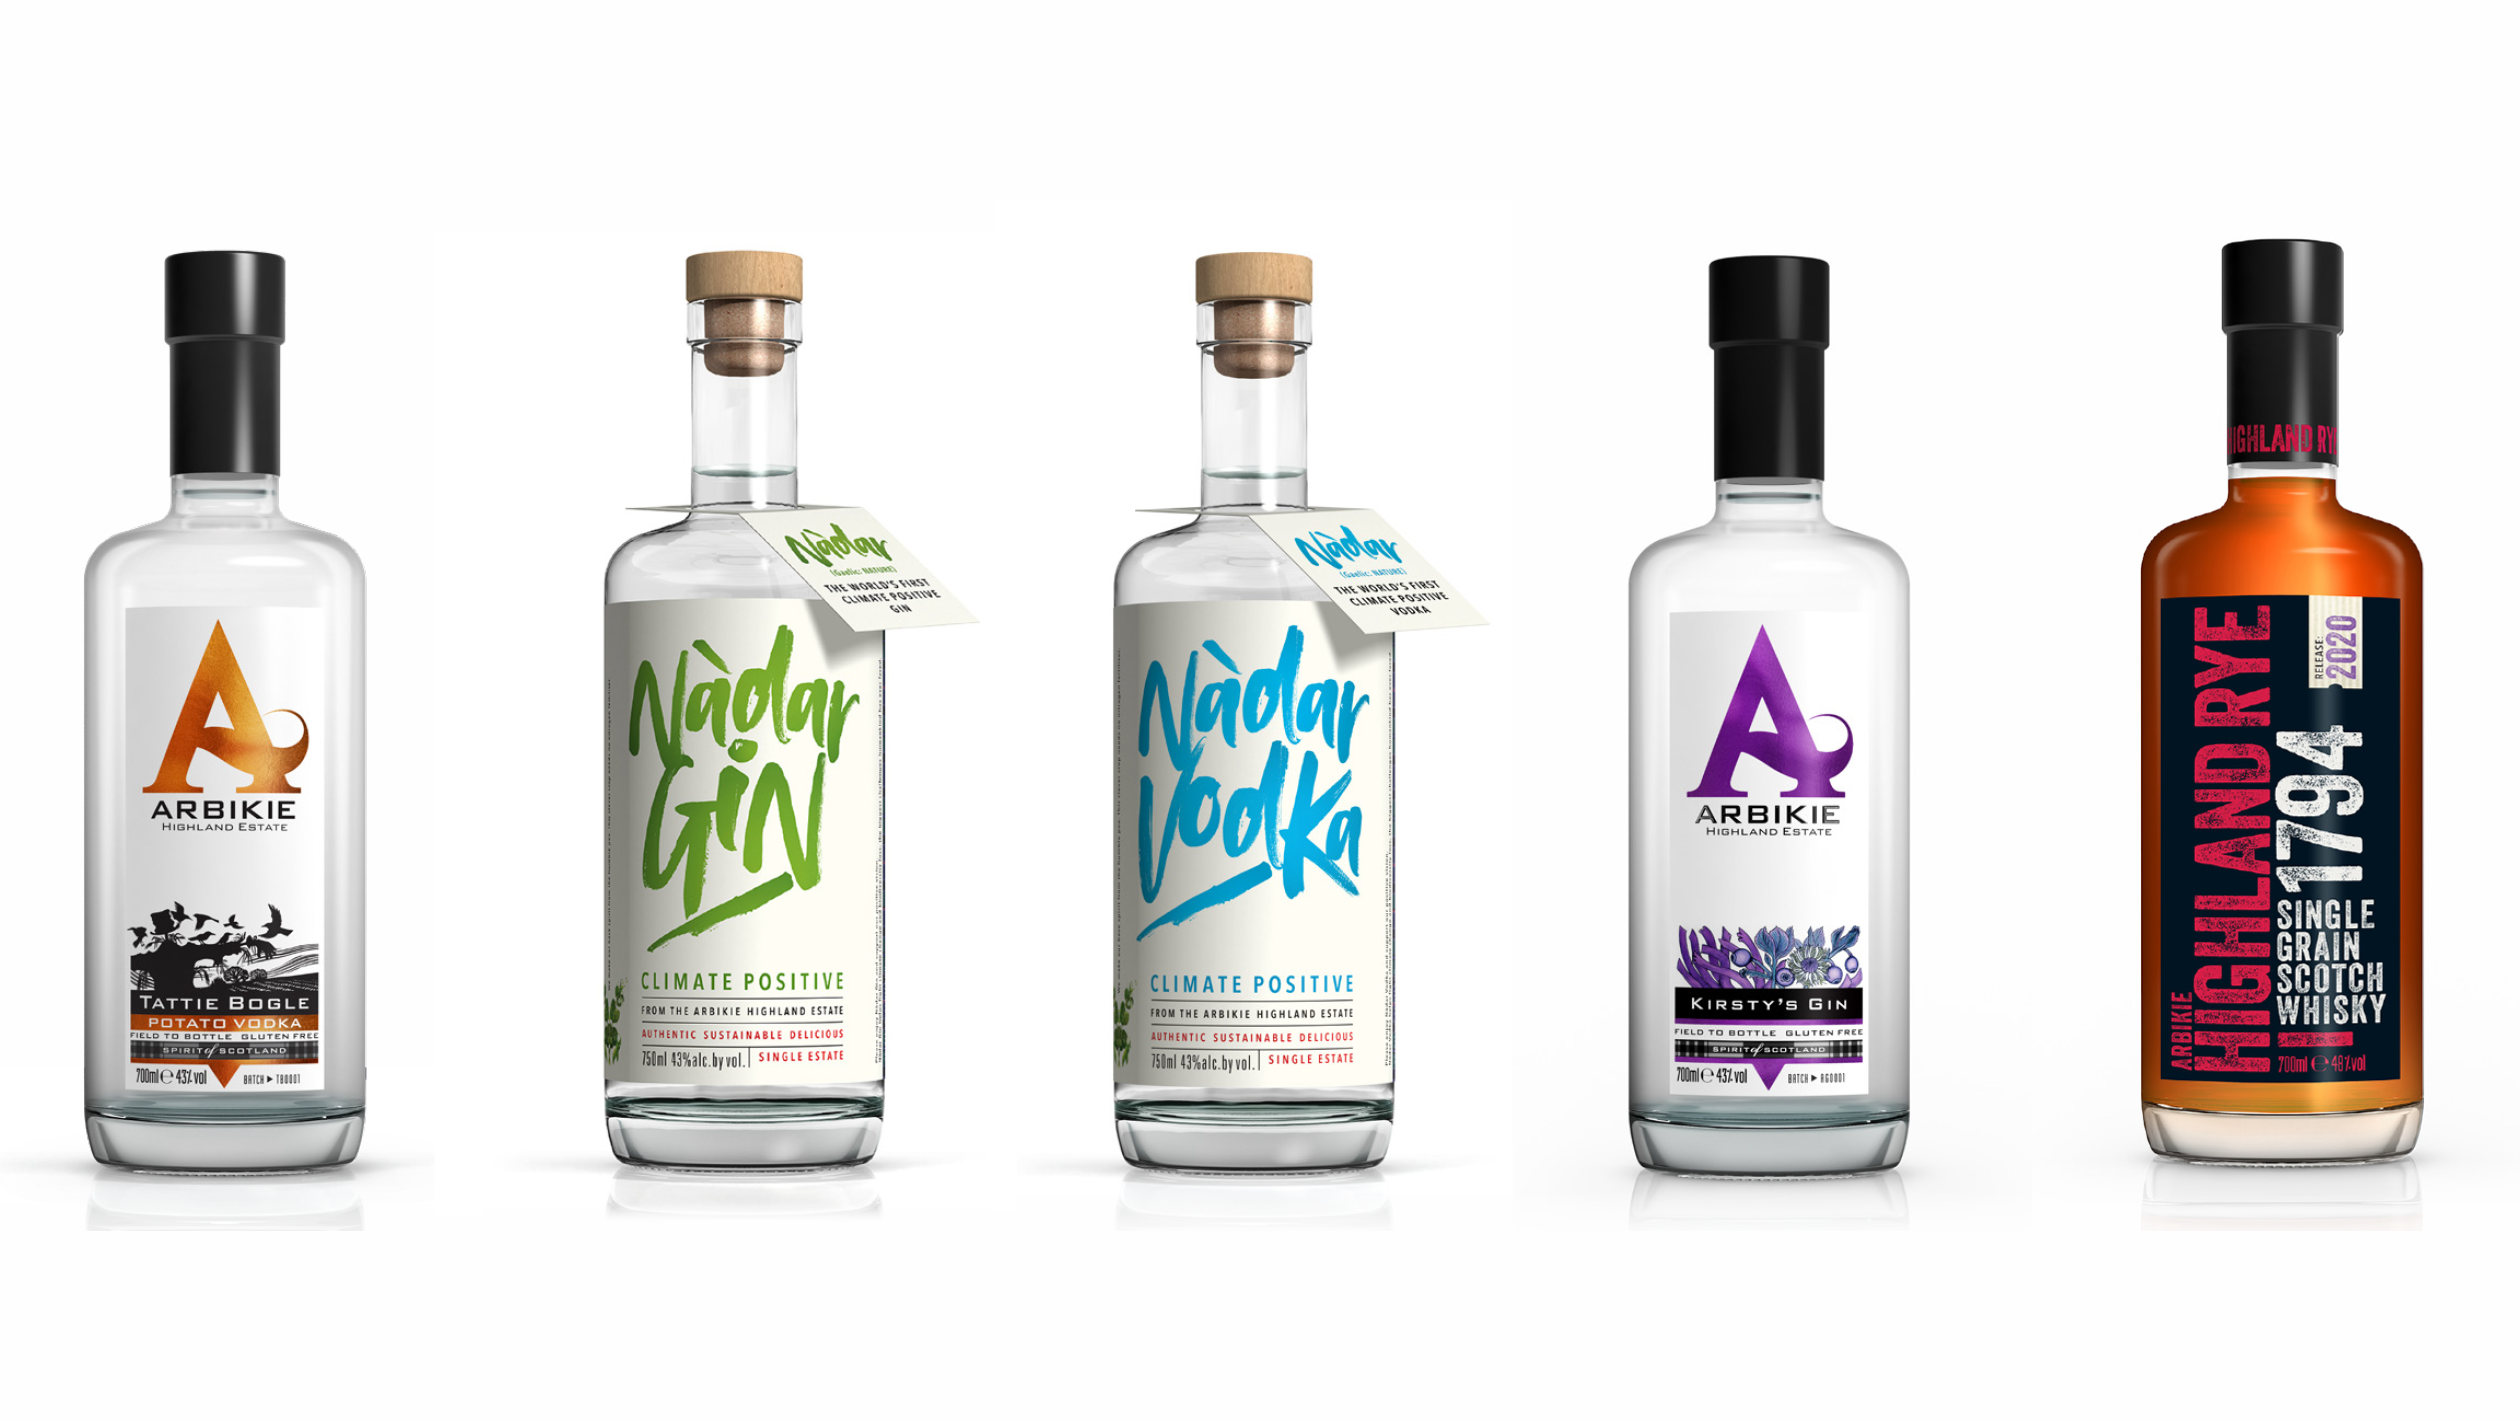 A lineup of Arbikie's spirits collection